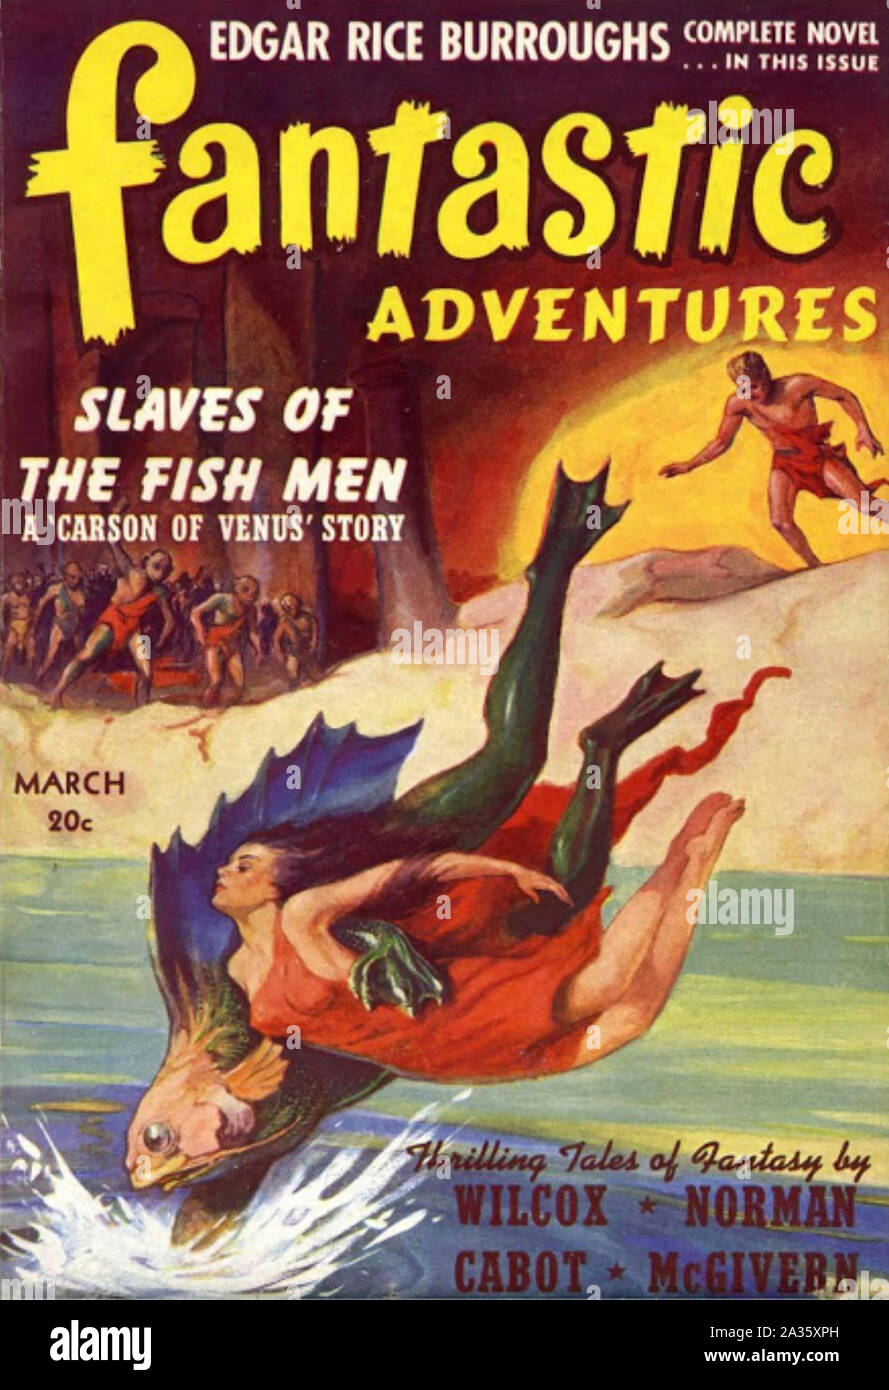 FANTASTIC ADVENTURES American sci-fi magazine with cover by James Allen St. John. March 1941 edition with story by Edgar Rice Burroughs. Stock Photo